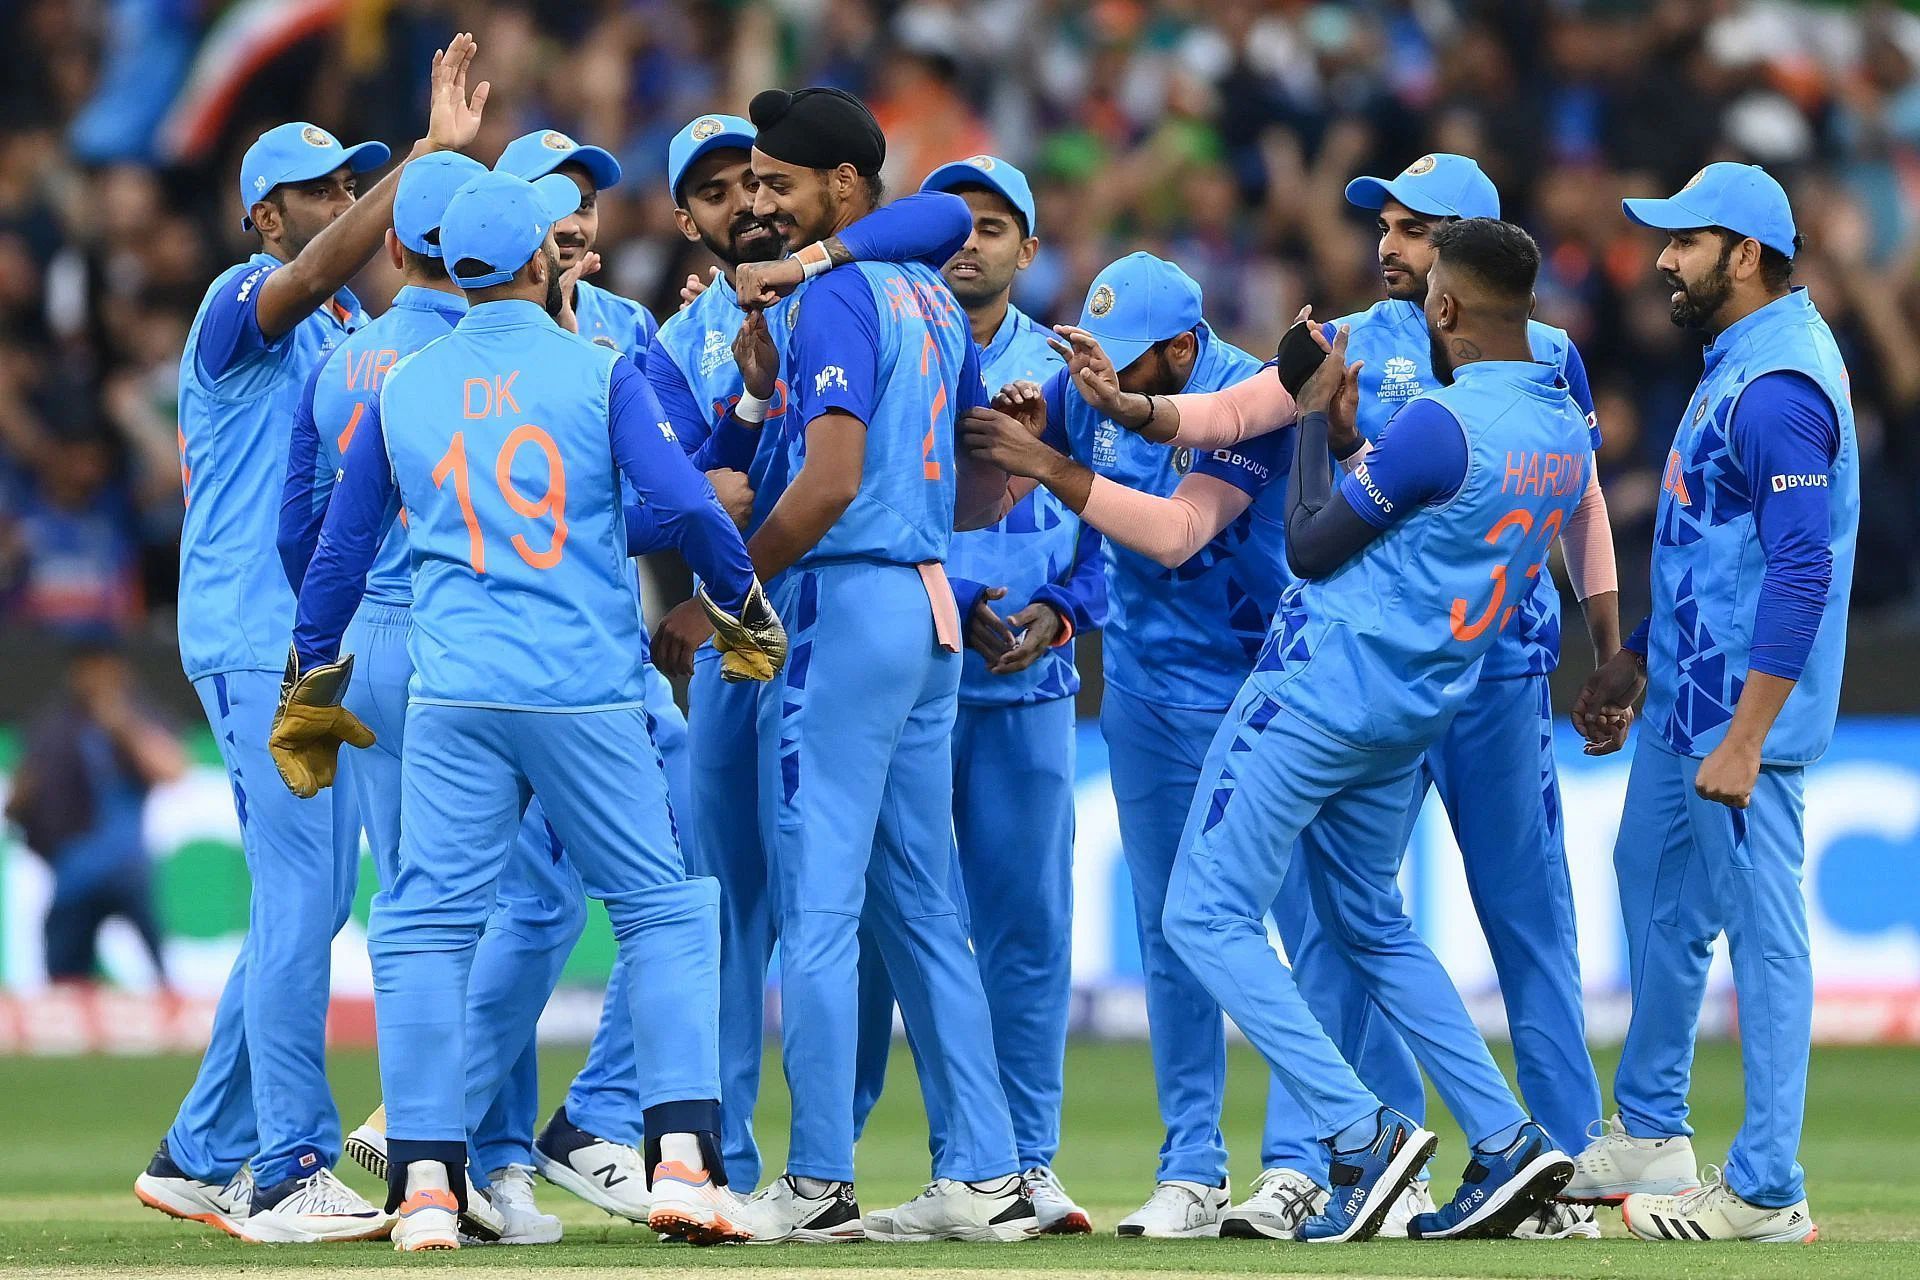 Arshdeep Singh got Team India&rsquo;s T20 World Cup campaign off to a flying start, trapping Pakistan captain Babar Azam leg before for a golden duck. He also dismissed Mohammad Rizwan for four and finished with figures of 3/32. Pic: Getty Images